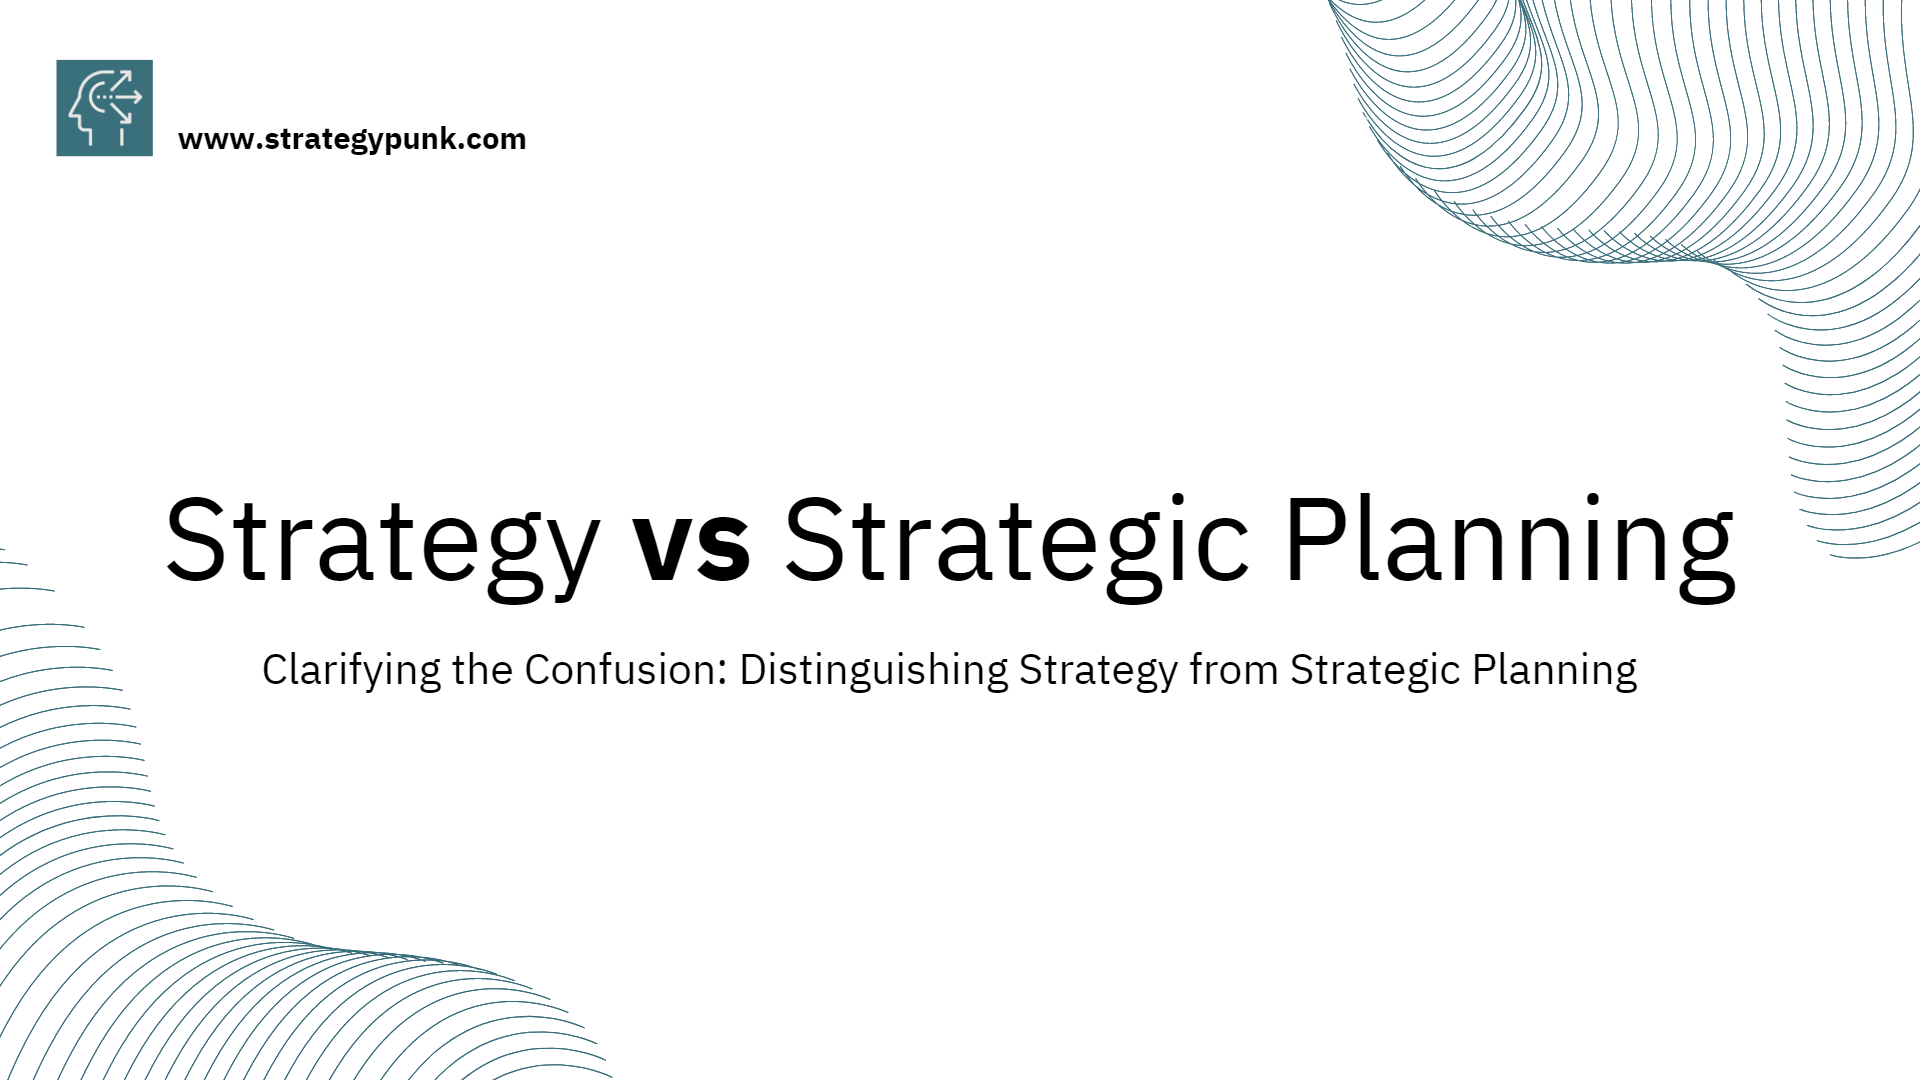 Clarifying the Confusion: Distinguishing Strategy from Strategic Planning (Plus PDF)